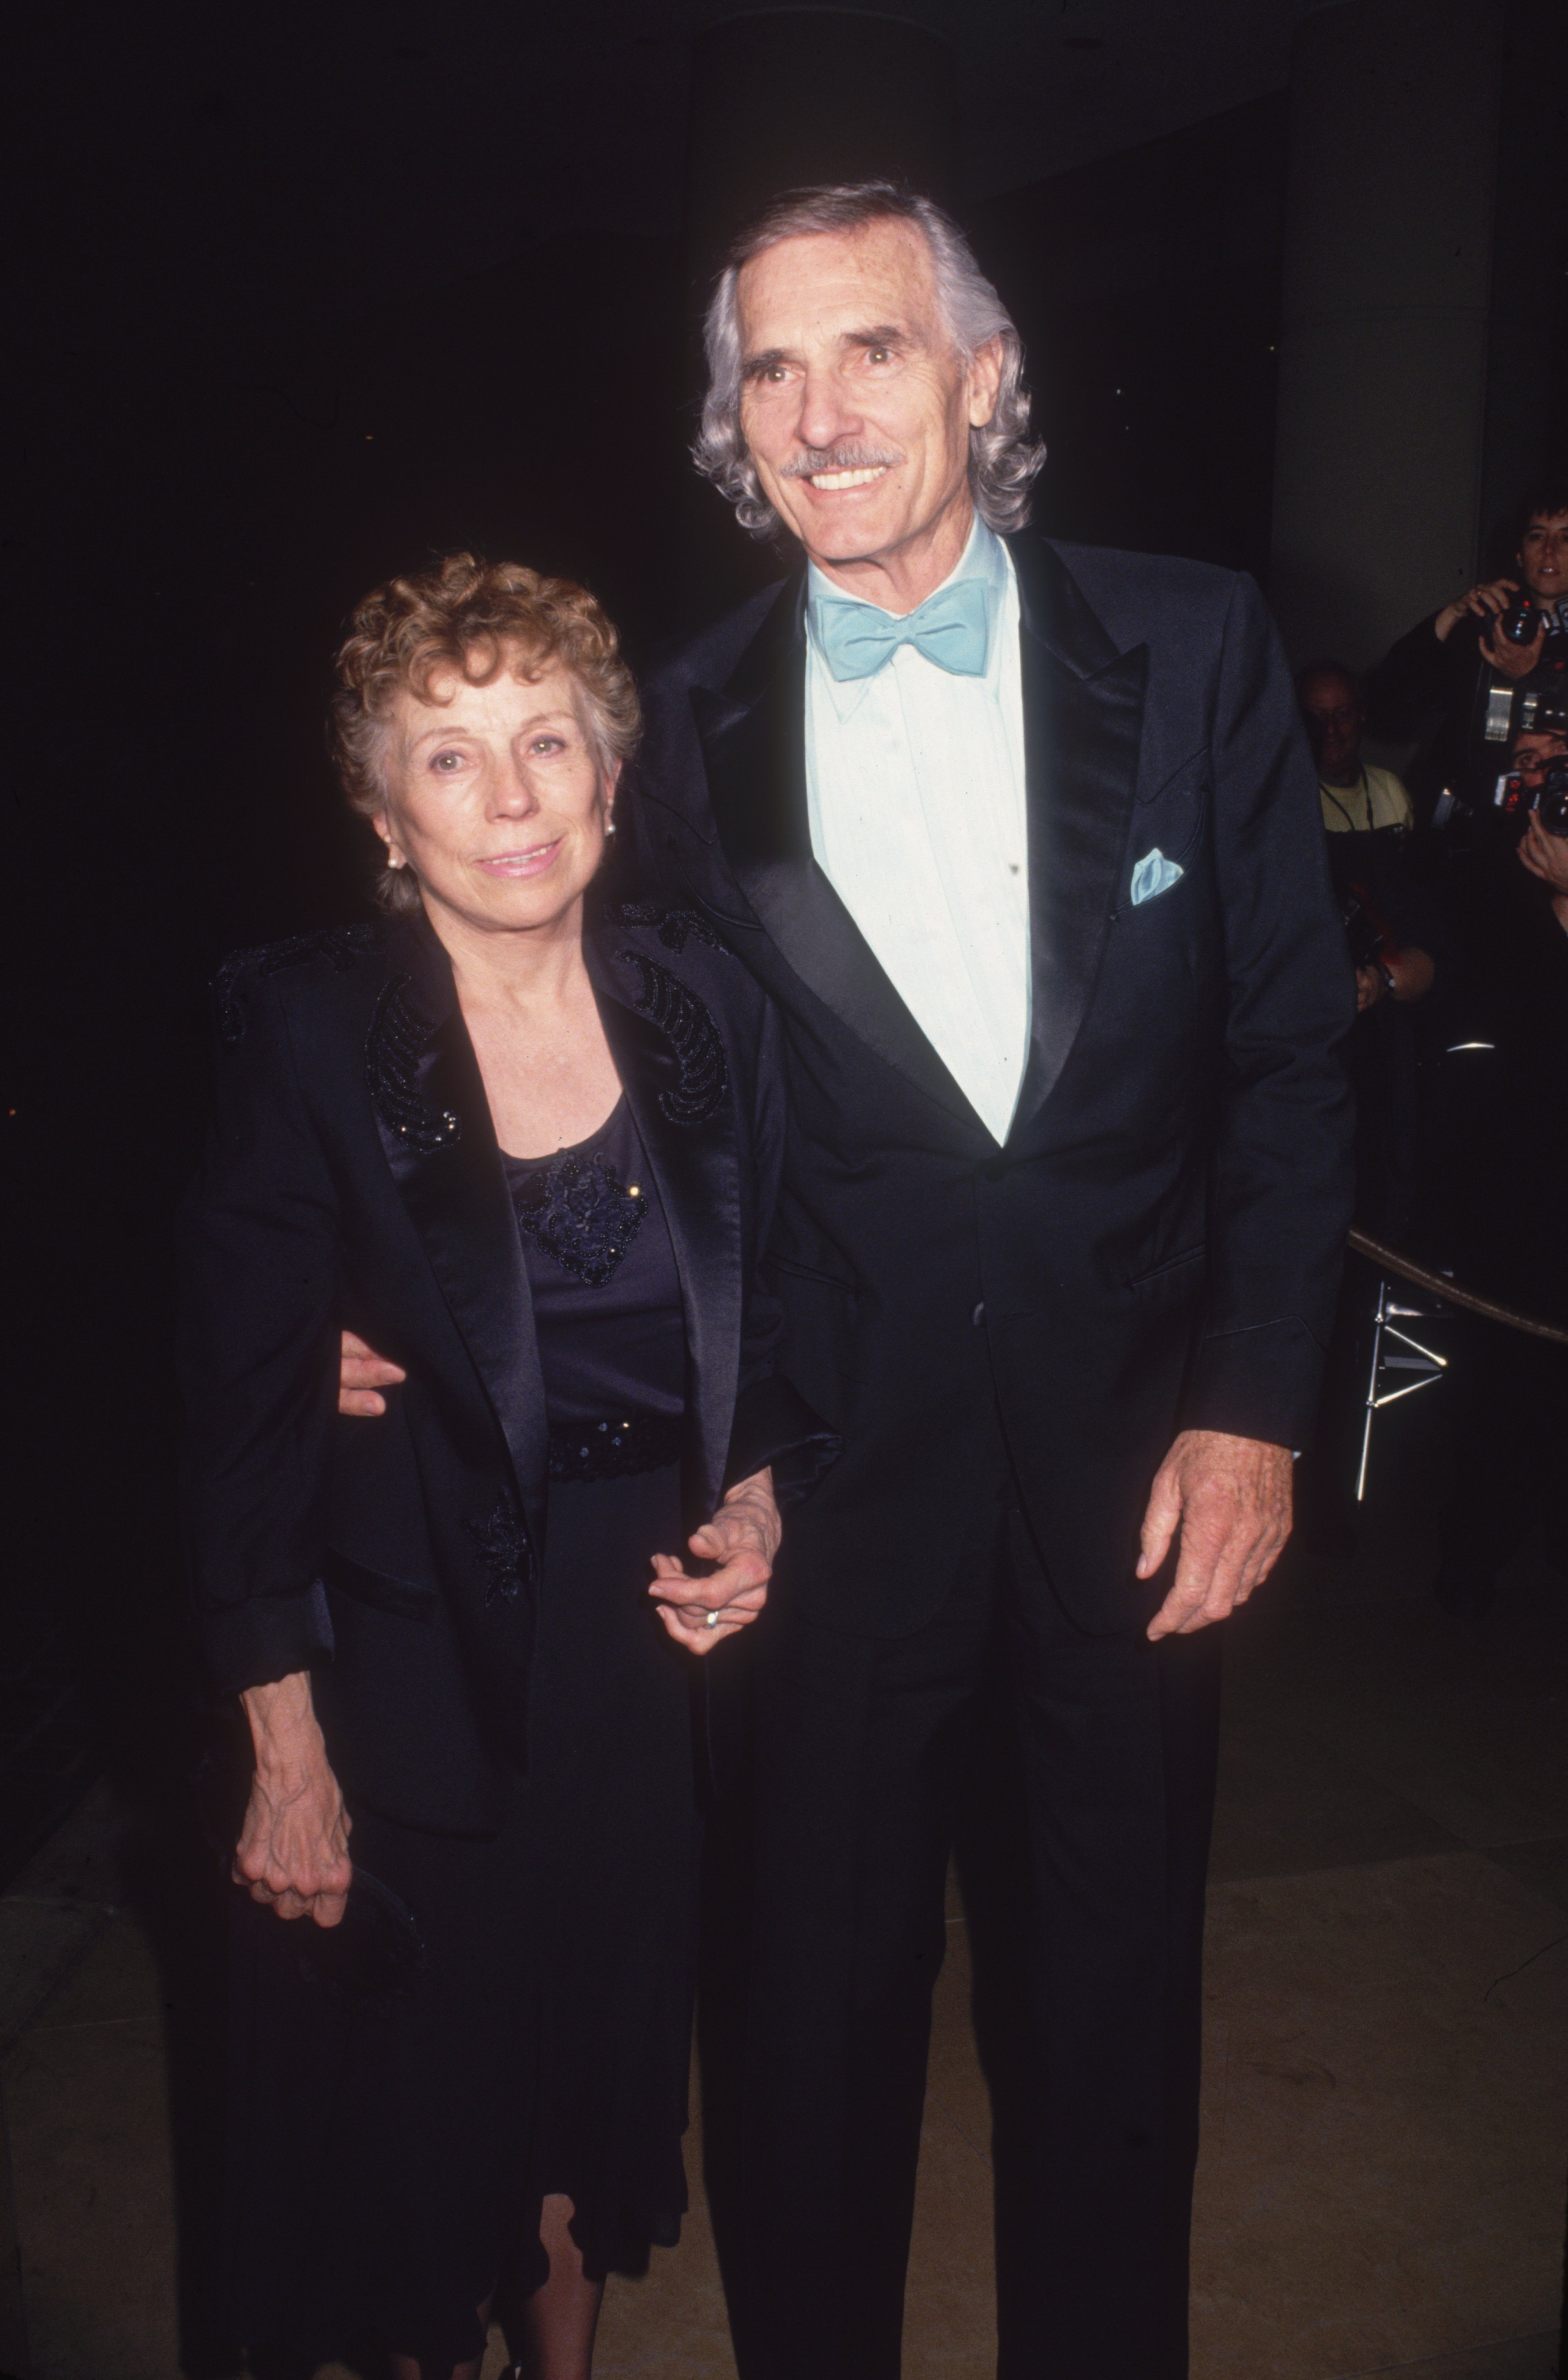 Gerry Stowell and her husband Dennis Weaver at the American Film Institute's Lifetime Achievement Award celebration in 1995. / Source: Getty Images